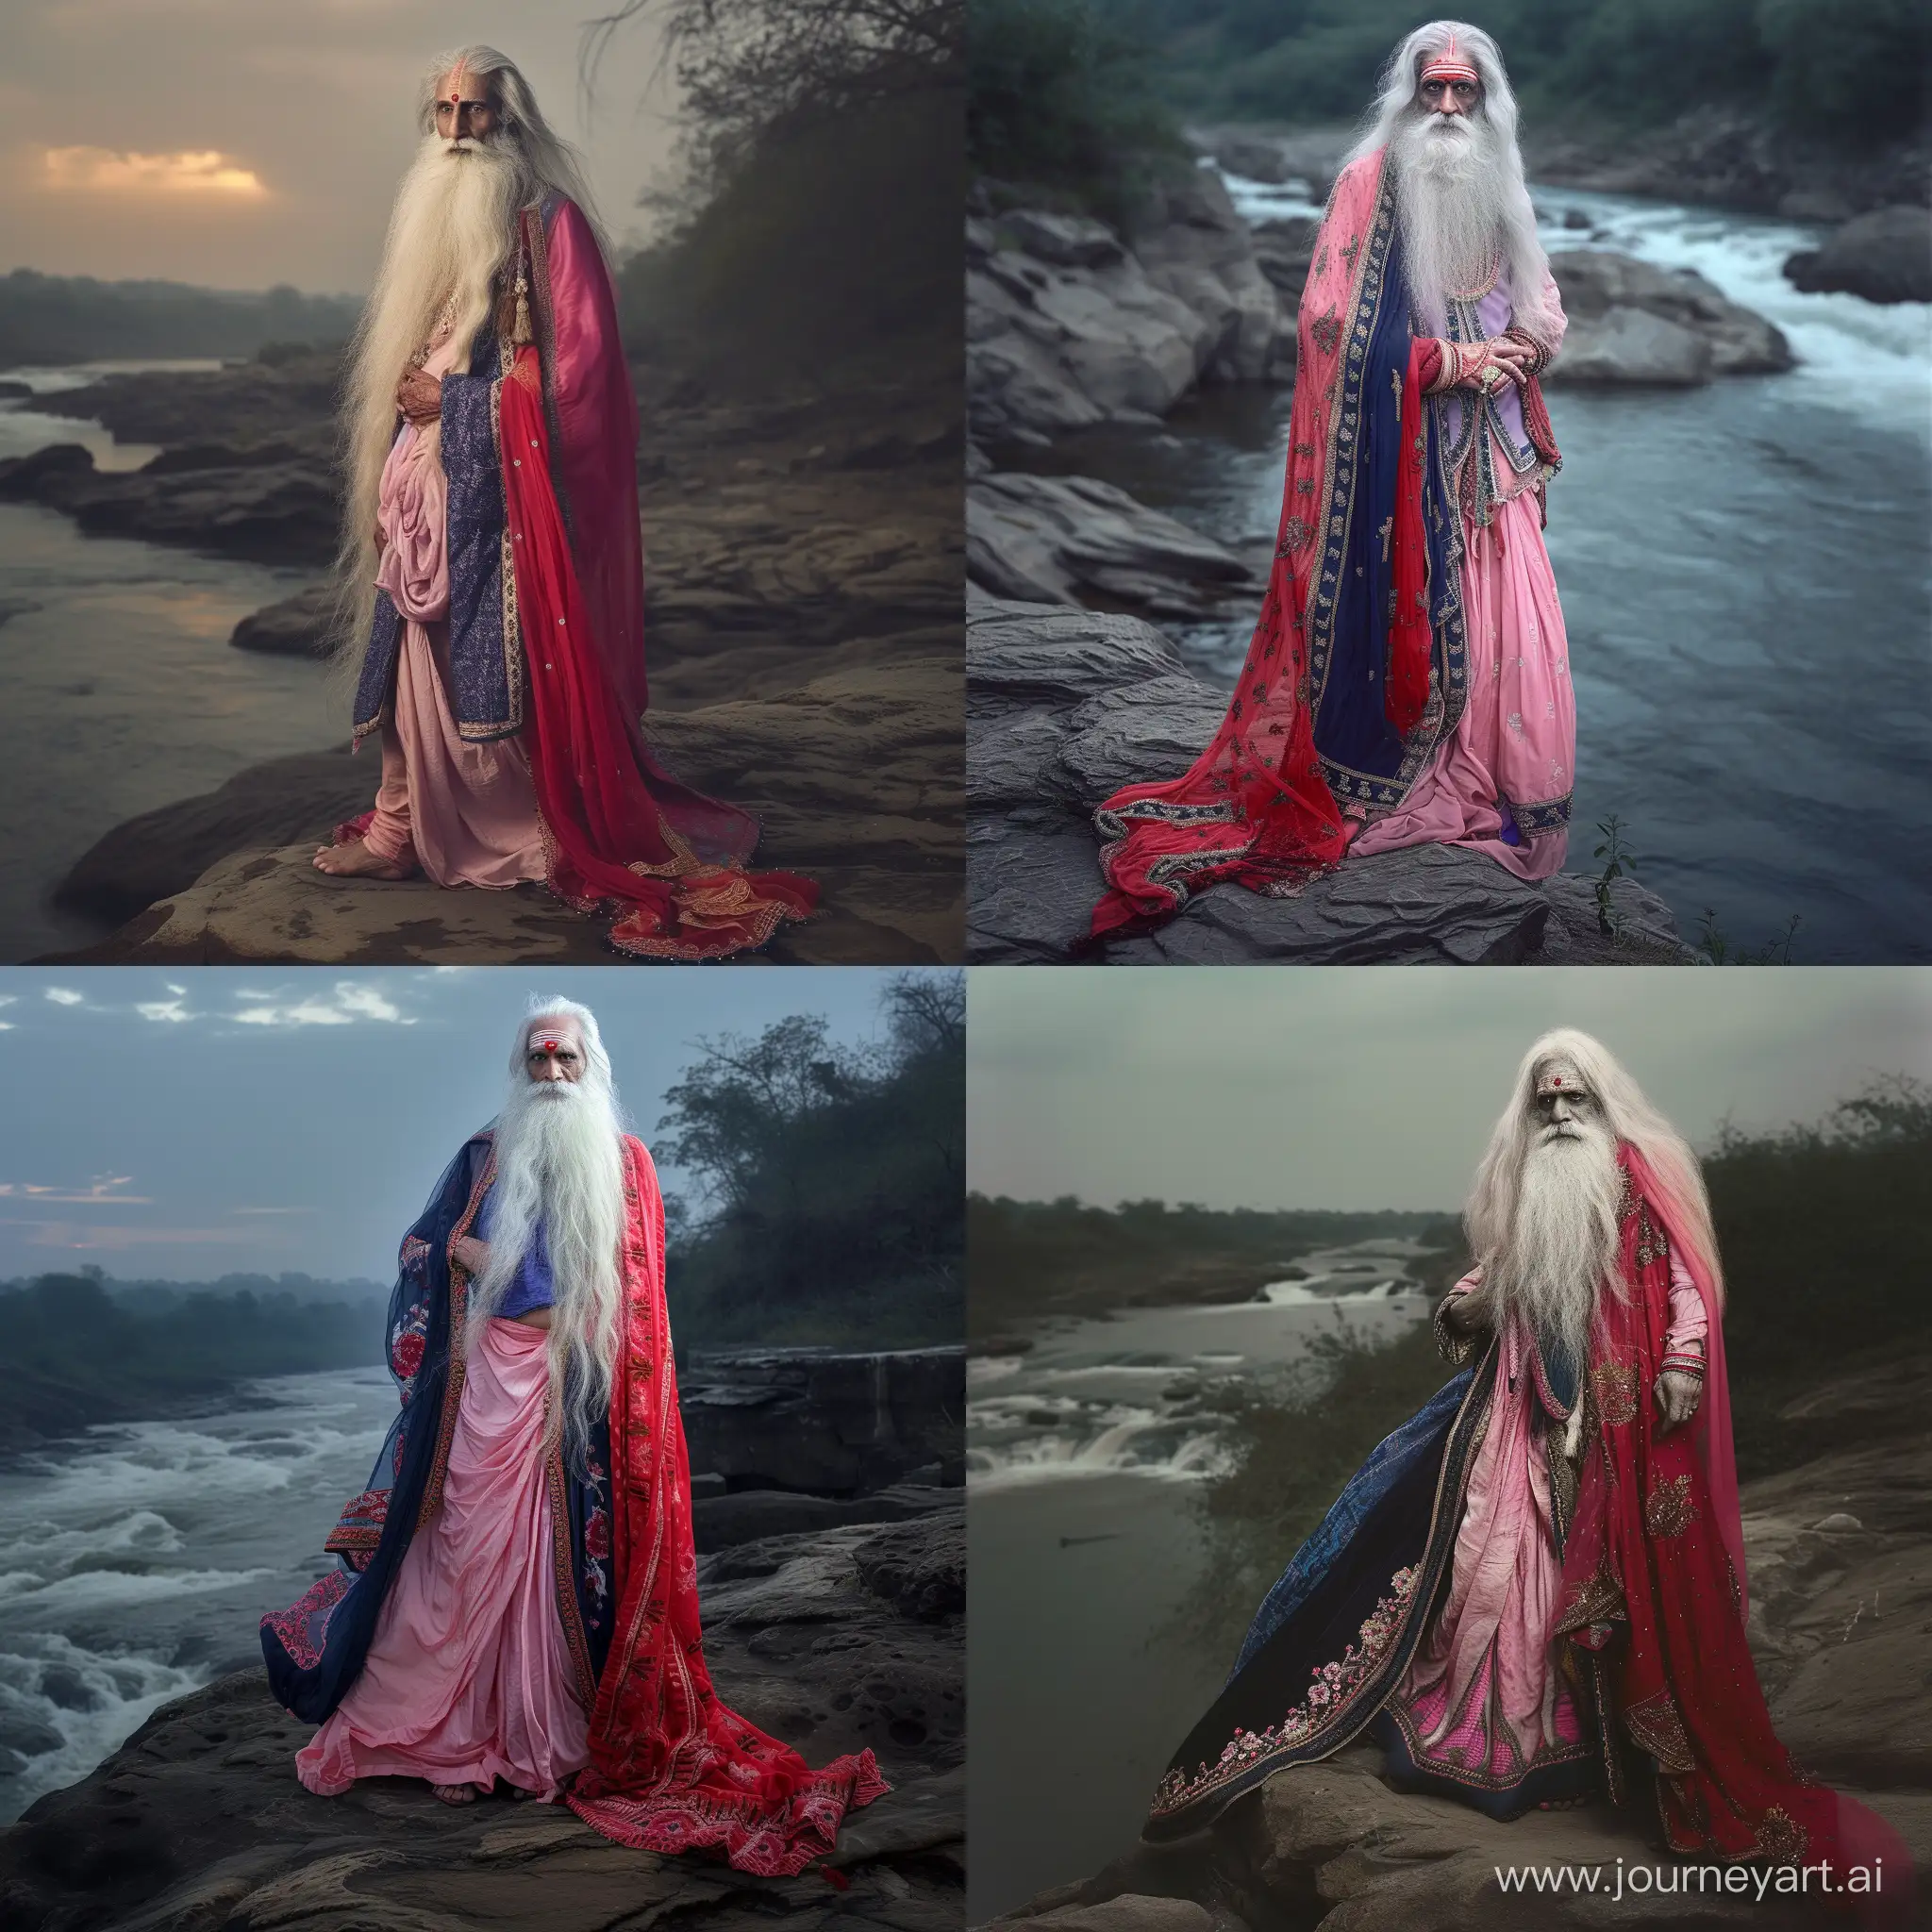 Elderly-Indian-Gentleman-with-White-Long-Hair-and-Beard-Adorned-in-Pink-and-Blue-Attire-Standing-Gracefully-by-a-Riverside-Rock